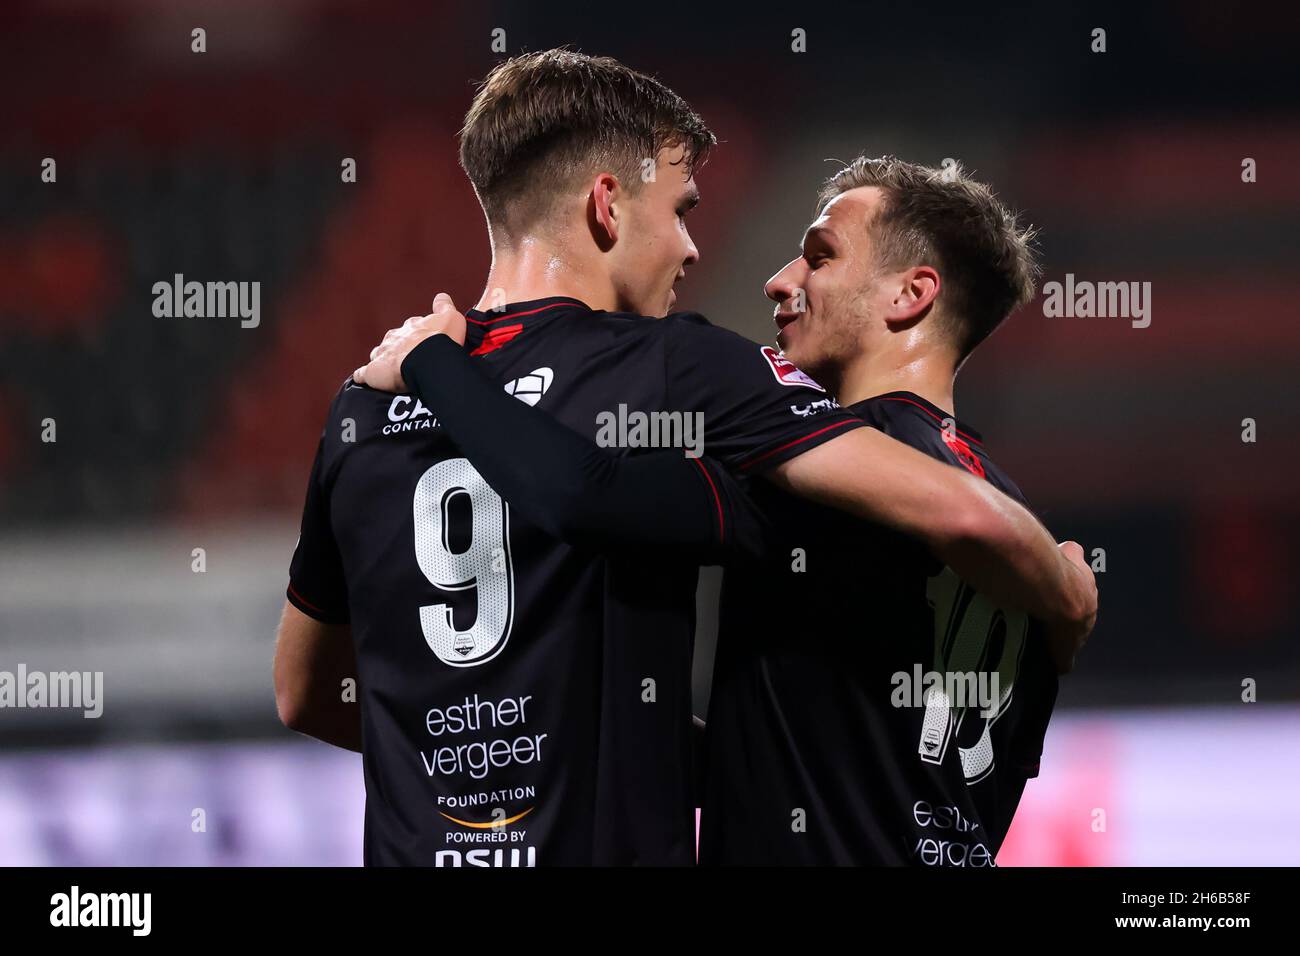 ROTTERDAM, NETHERLANDS - NOVEMBER 14: Thijs Dallinga of Excelsior Rotterdam celebrates after scoring his sides second goal with Reuven Niemeijer of Excelsior Rotterdam during the Dutch Keukenkampioendivisie match between Excelsior and Almere City FC at the Van Donge & De Roo Stadion on November 14, 2021 in Rotterdam, Netherlands (Photo by Herman Dingler/Orange Pictures) Stock Photo